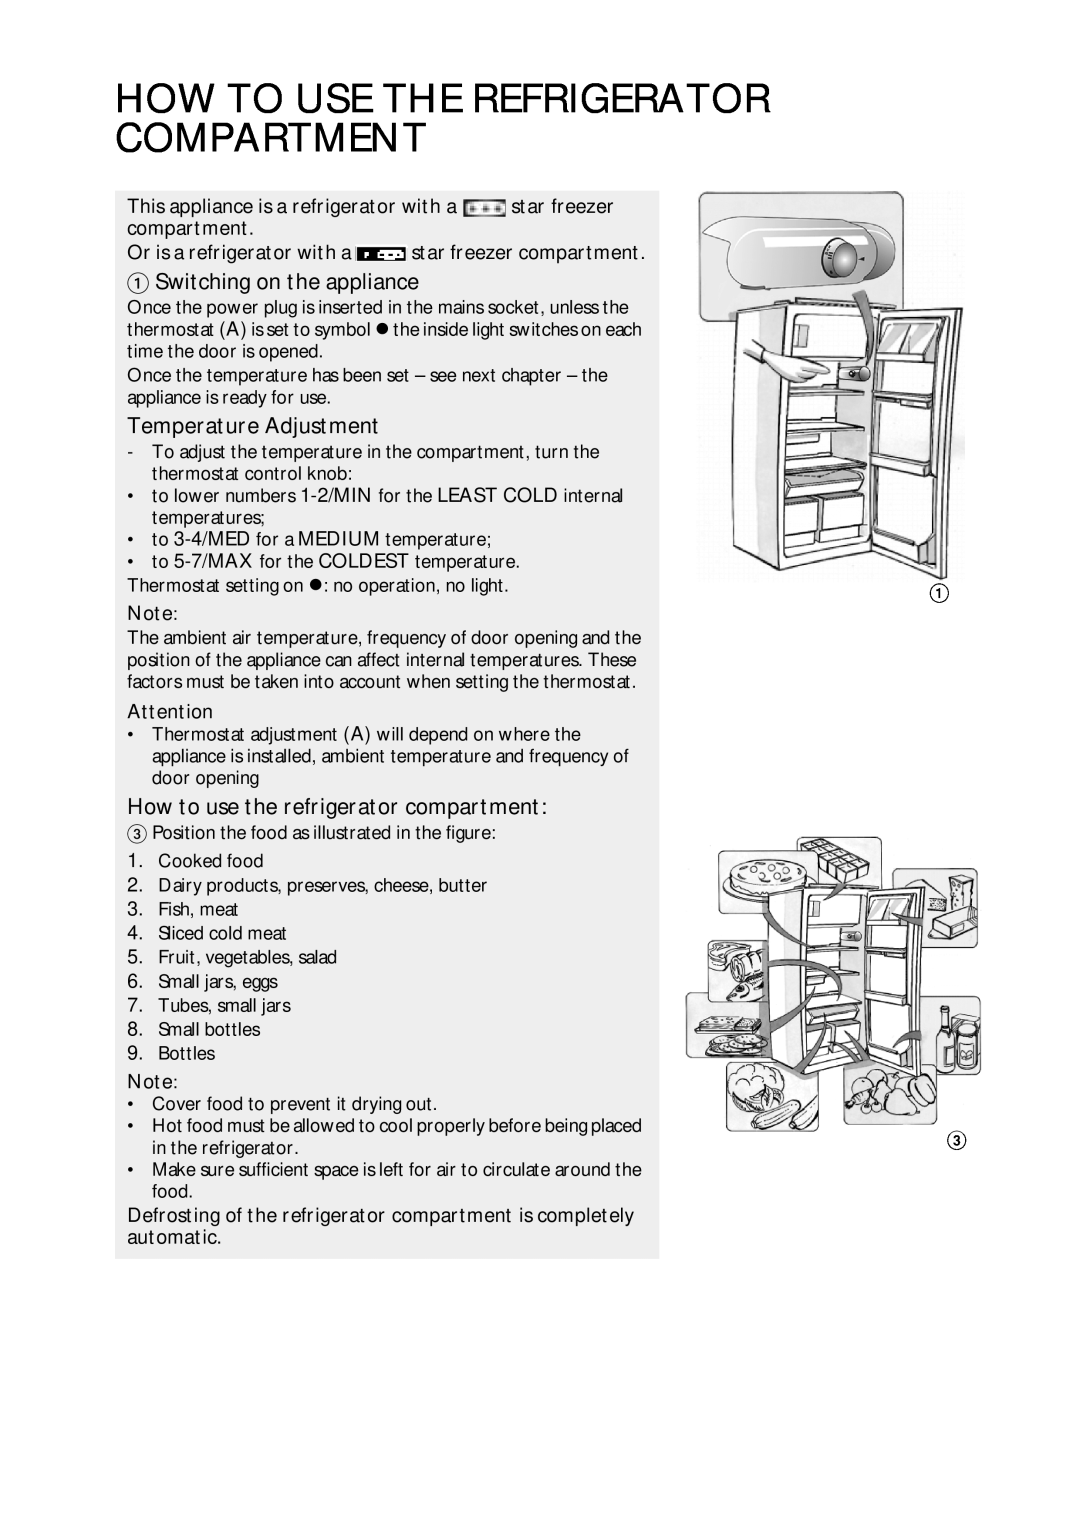 CDA FW420 manual Switching on the appliance, Temperature Adjustment, How to use the refrigerator compartment, star freezer 